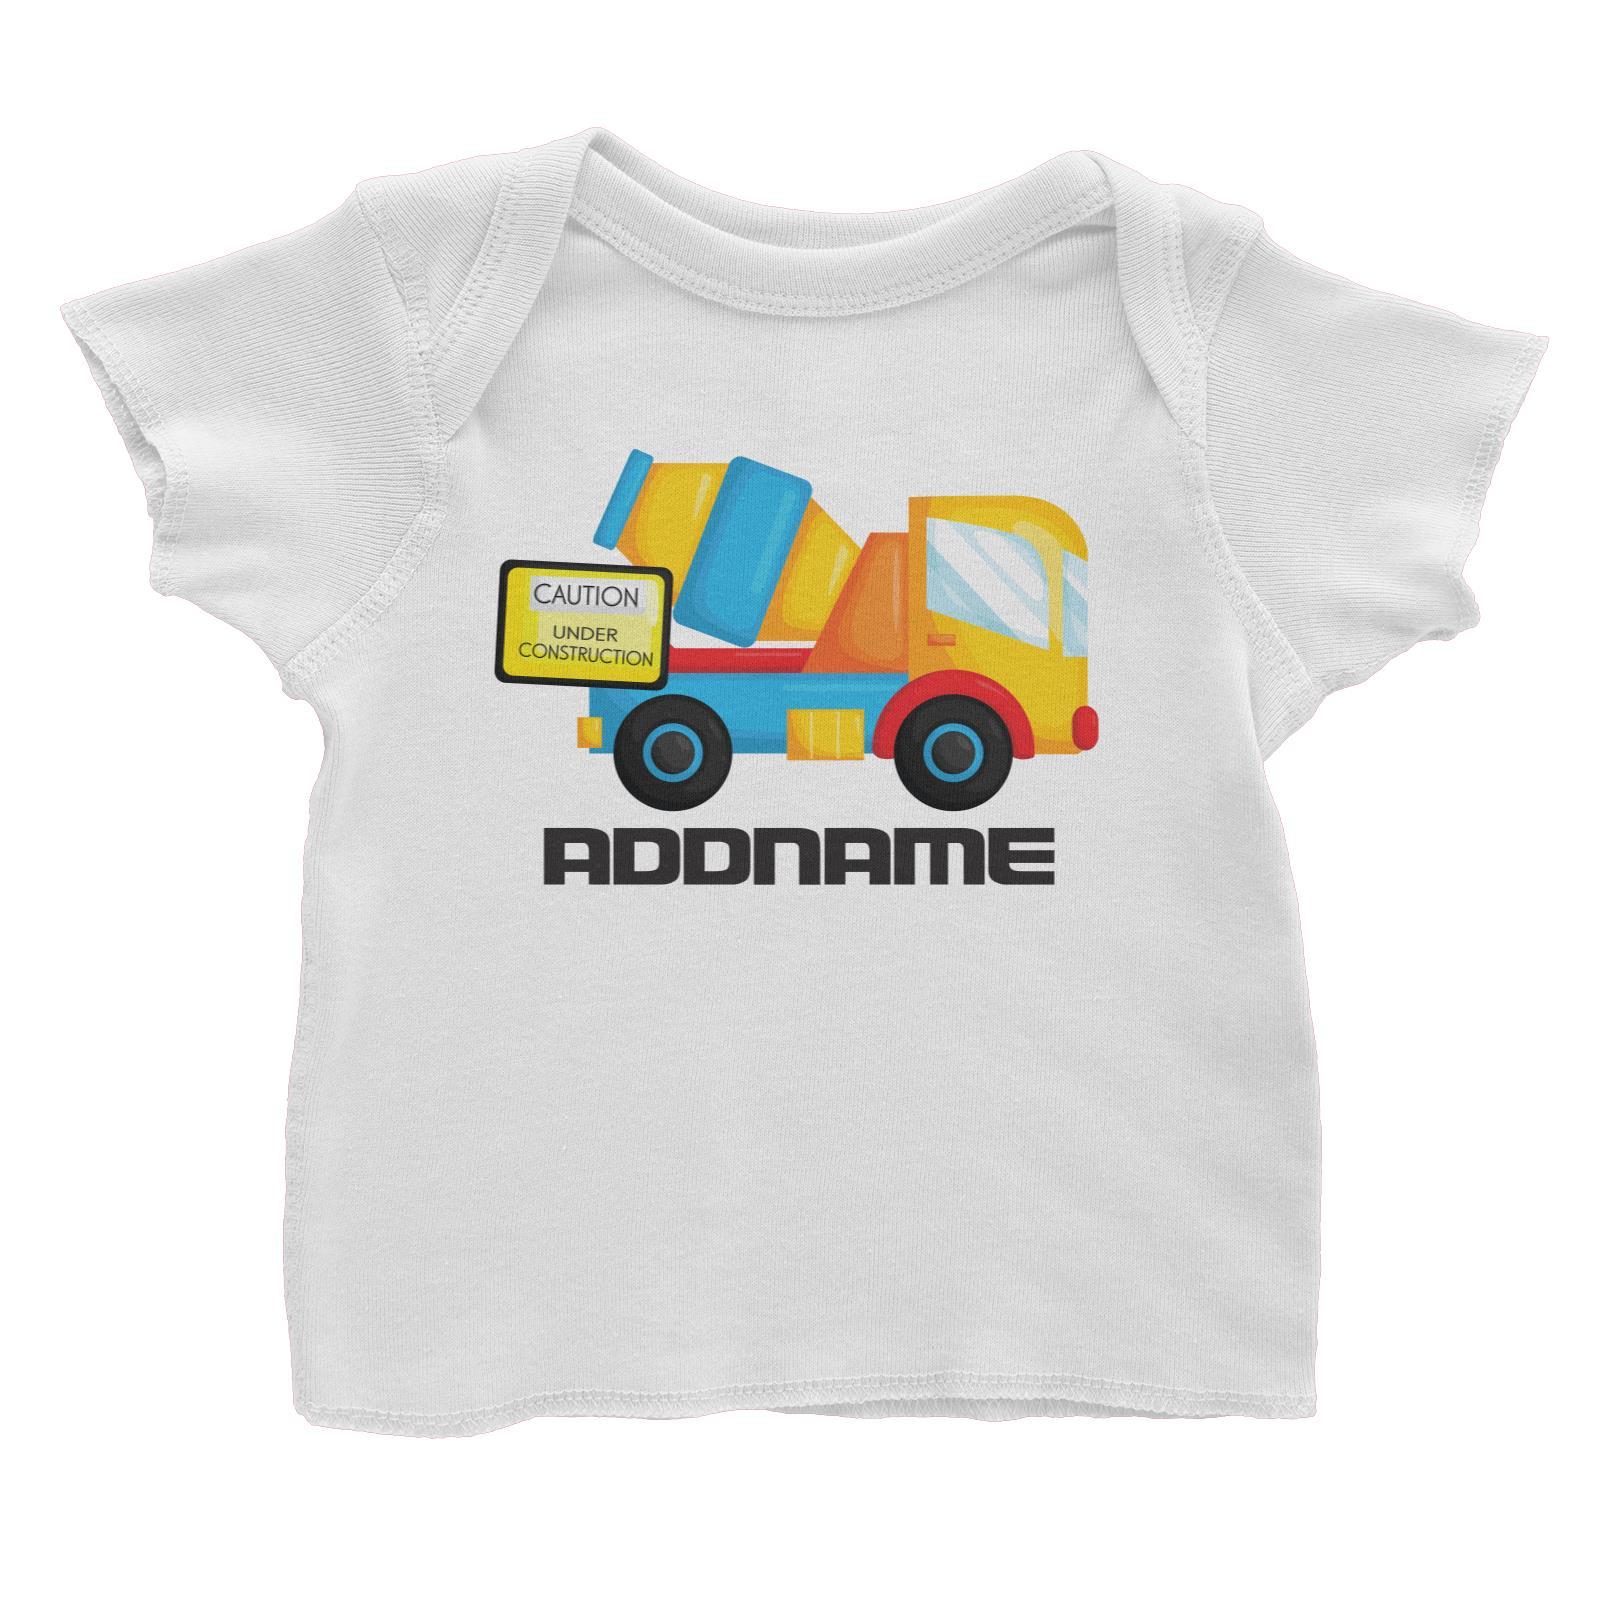 Birthday Construction Cement Mixer Addname Baby T-Shirt